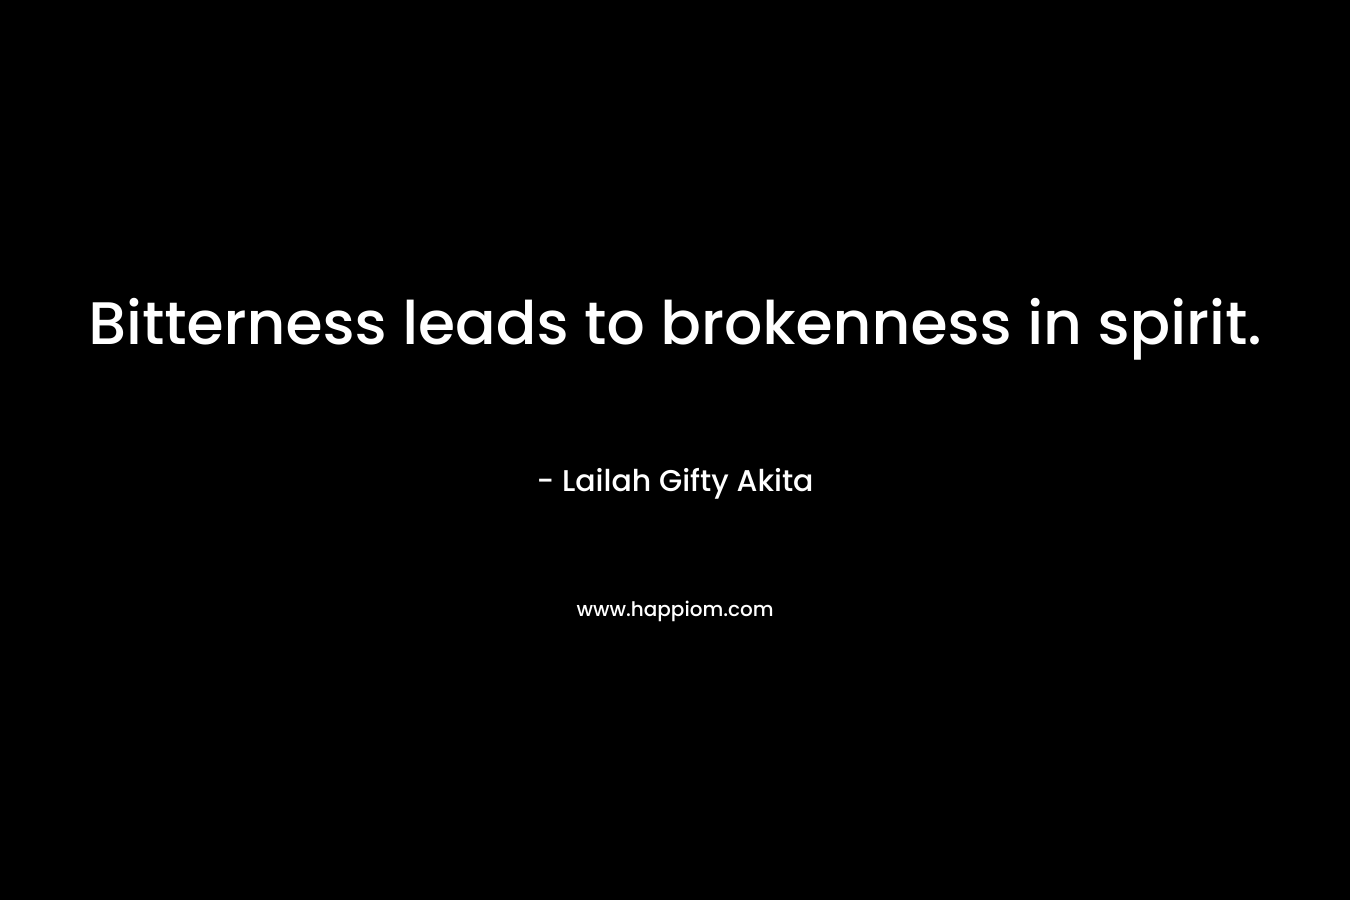 Bitterness leads to brokenness in spirit.